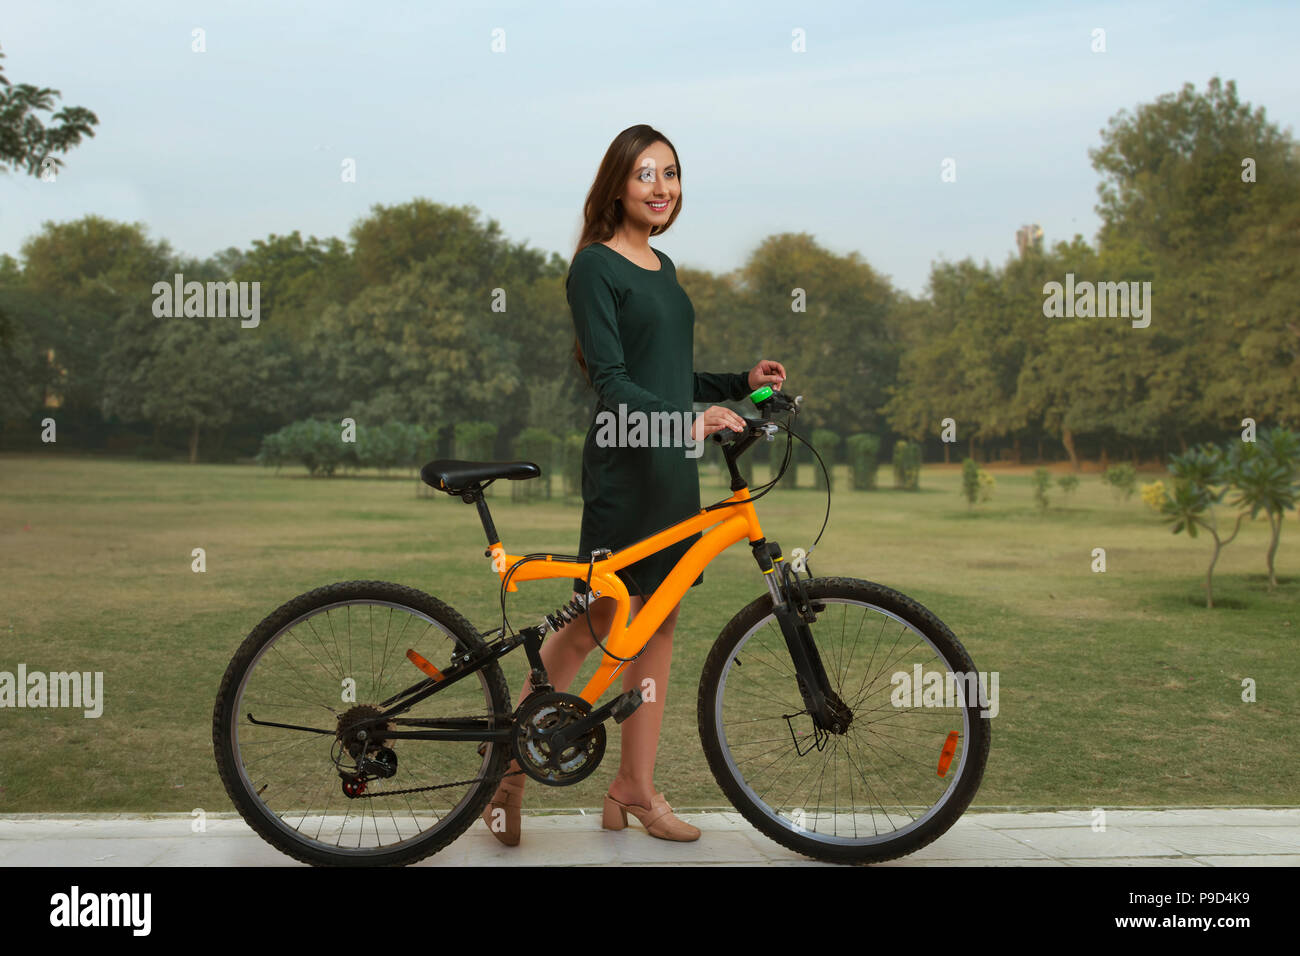 Smiling young woman in park with bicycle Banque D'Images